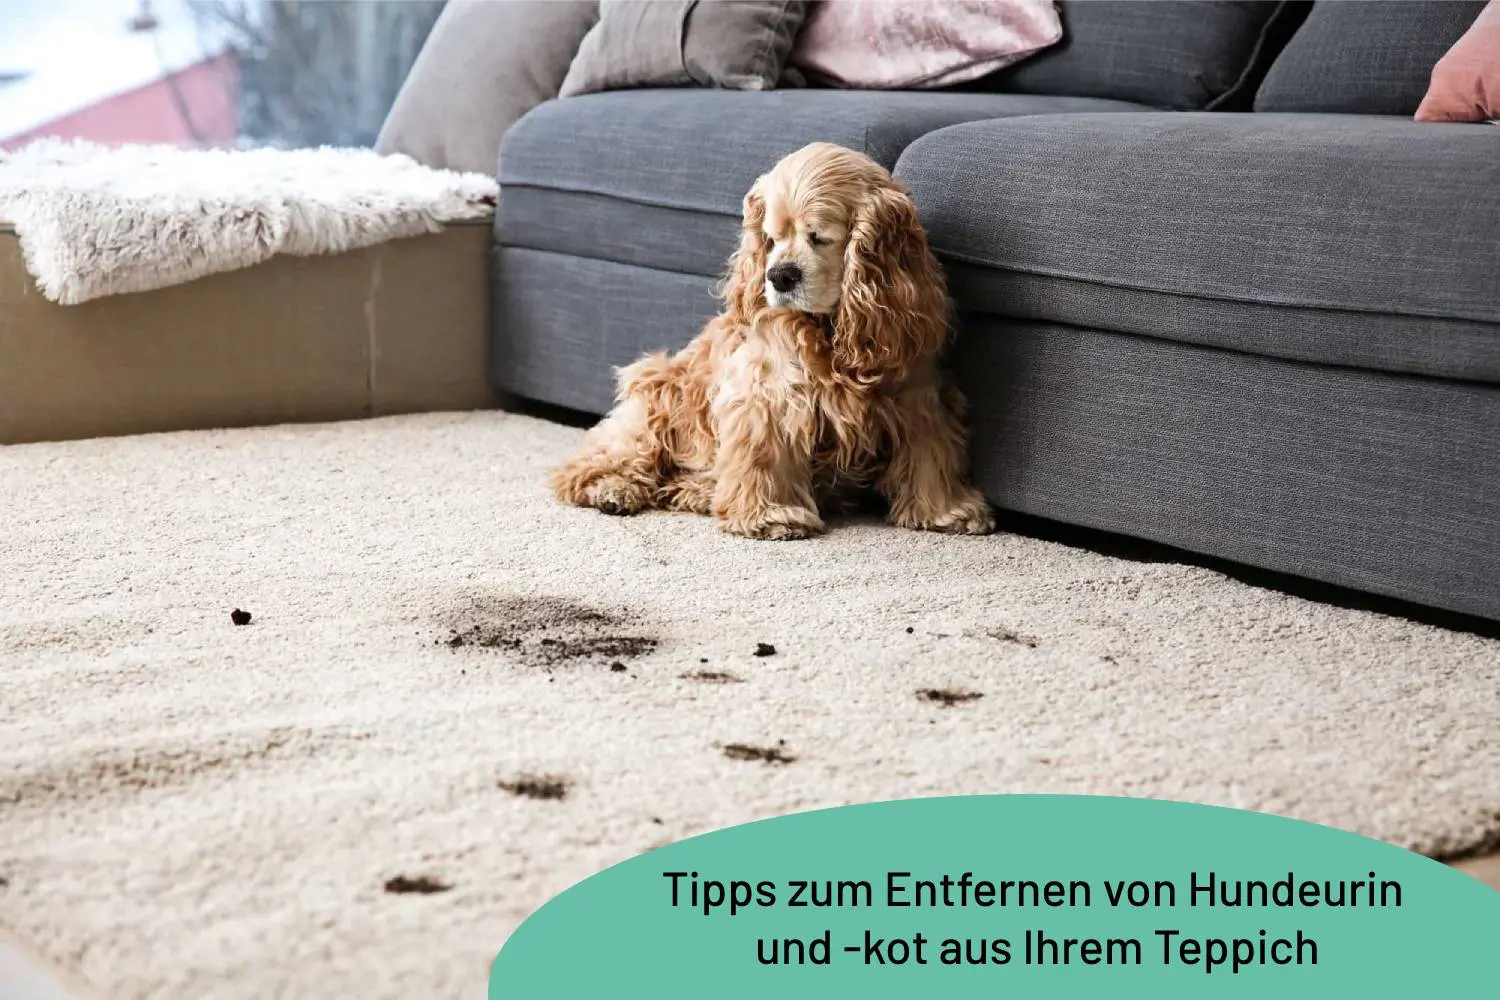 Tips To Get Rid Of Pet Urine And Poop Stains From Your Carpet